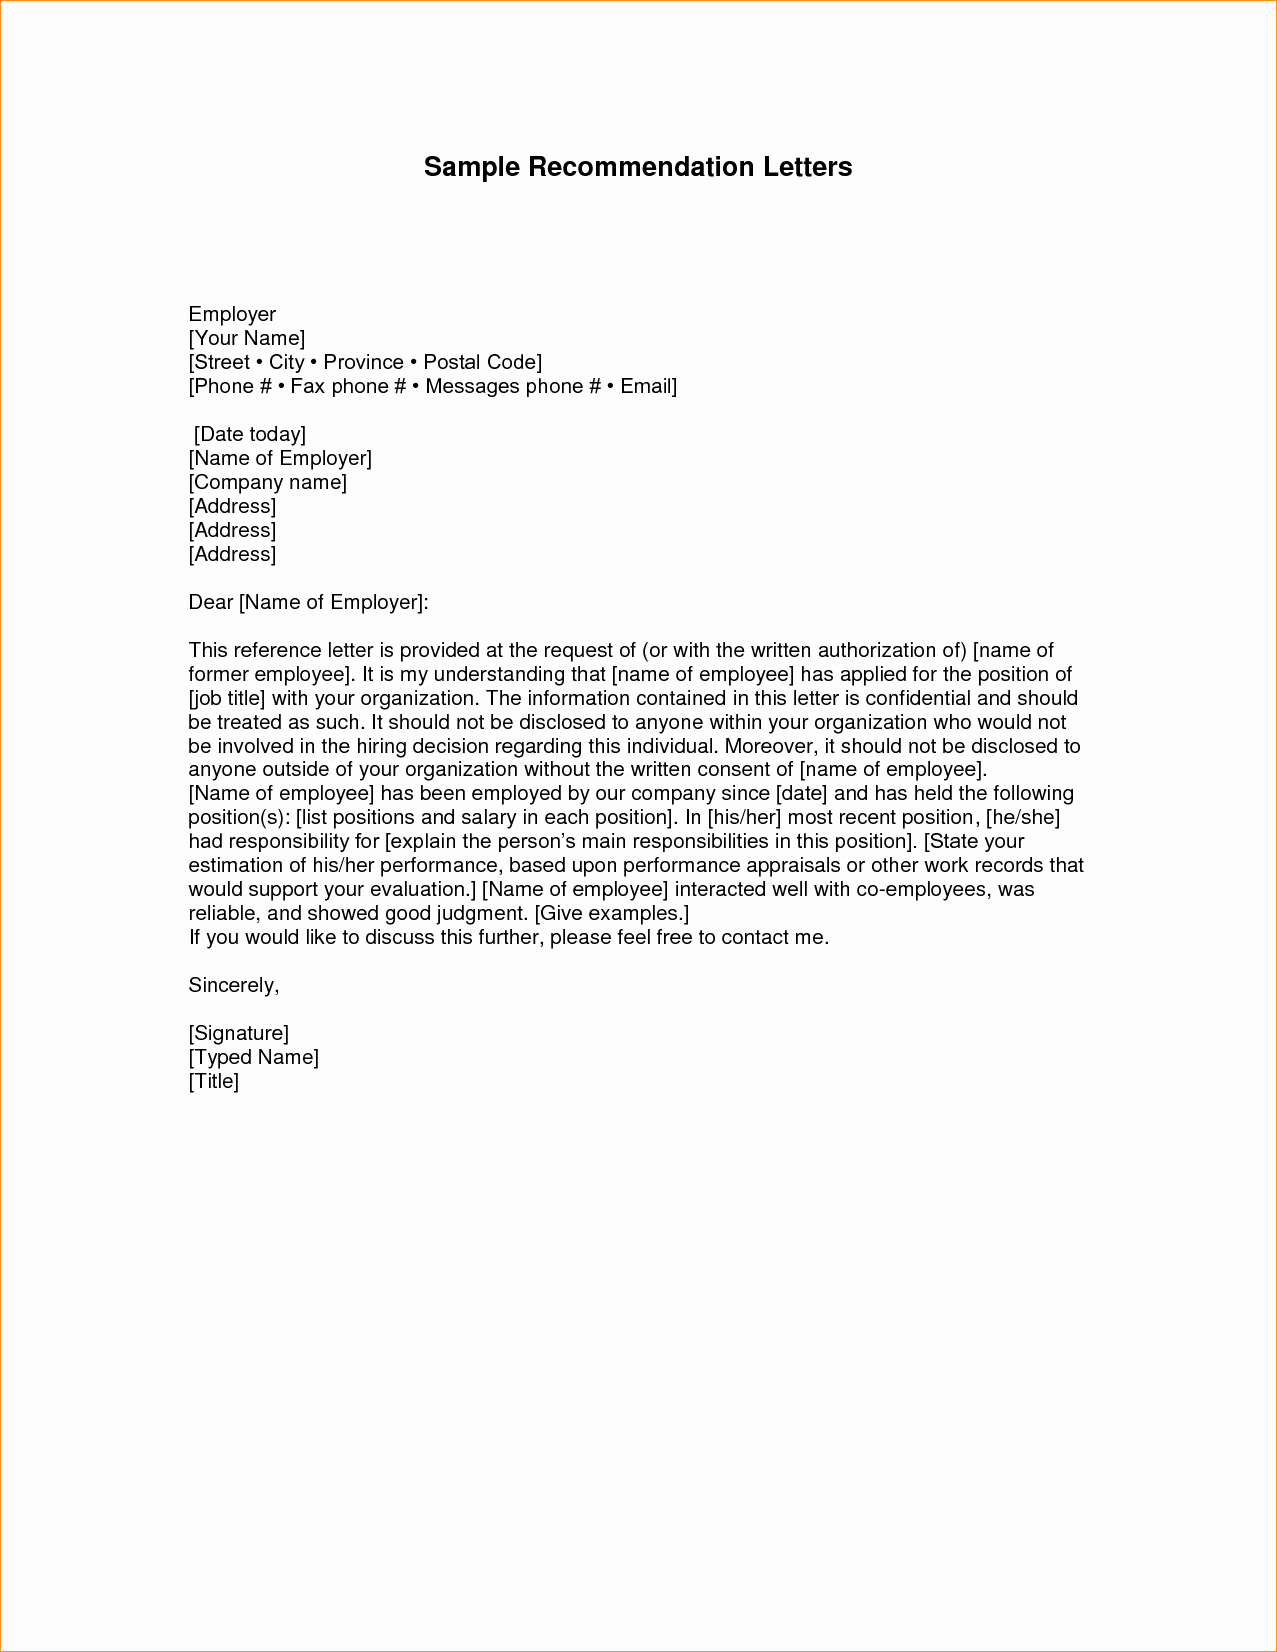 Letters Of Recommendation format Samples Best Of Addressing A Letter Of Re Mendation Business Proposal